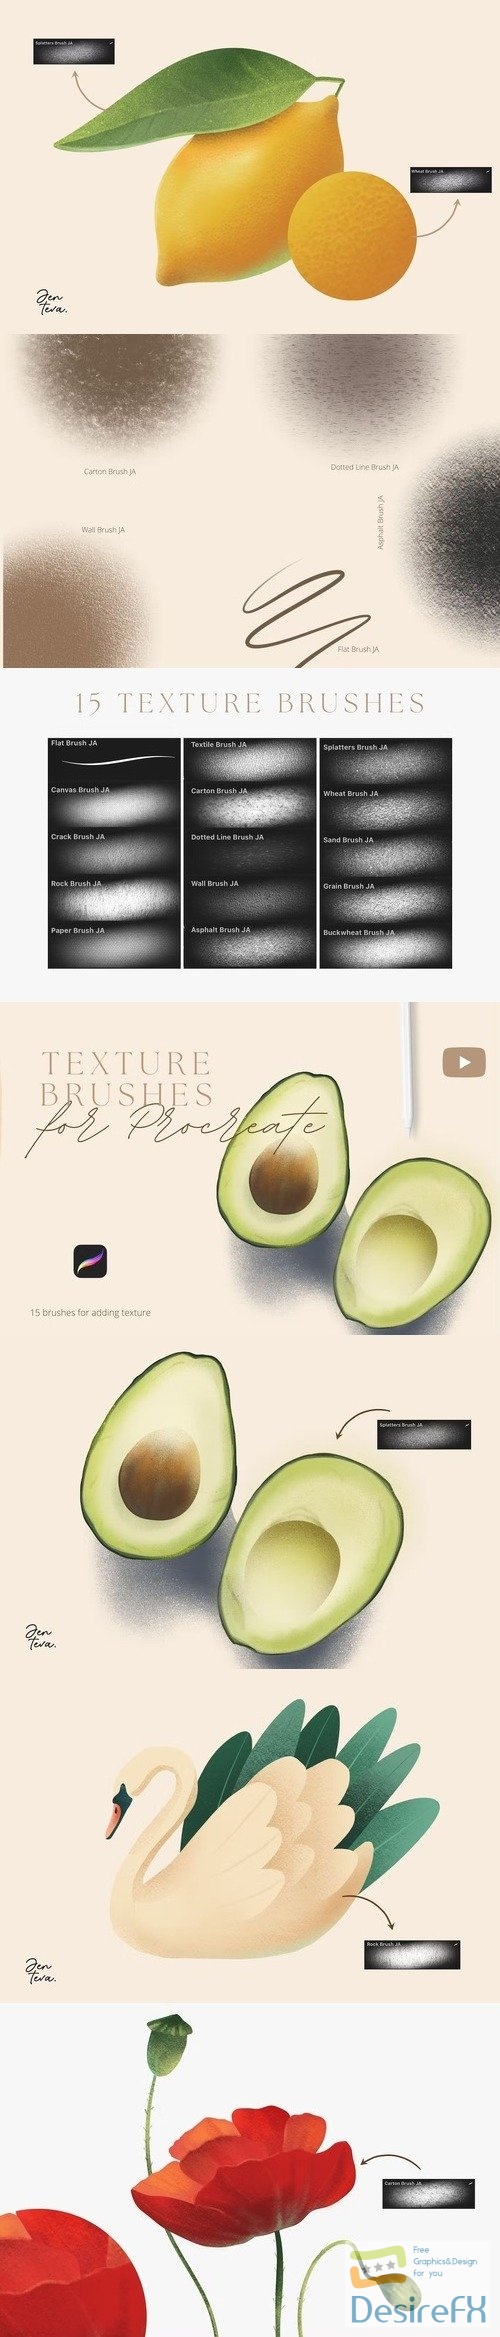 Texture brushes for Procreate